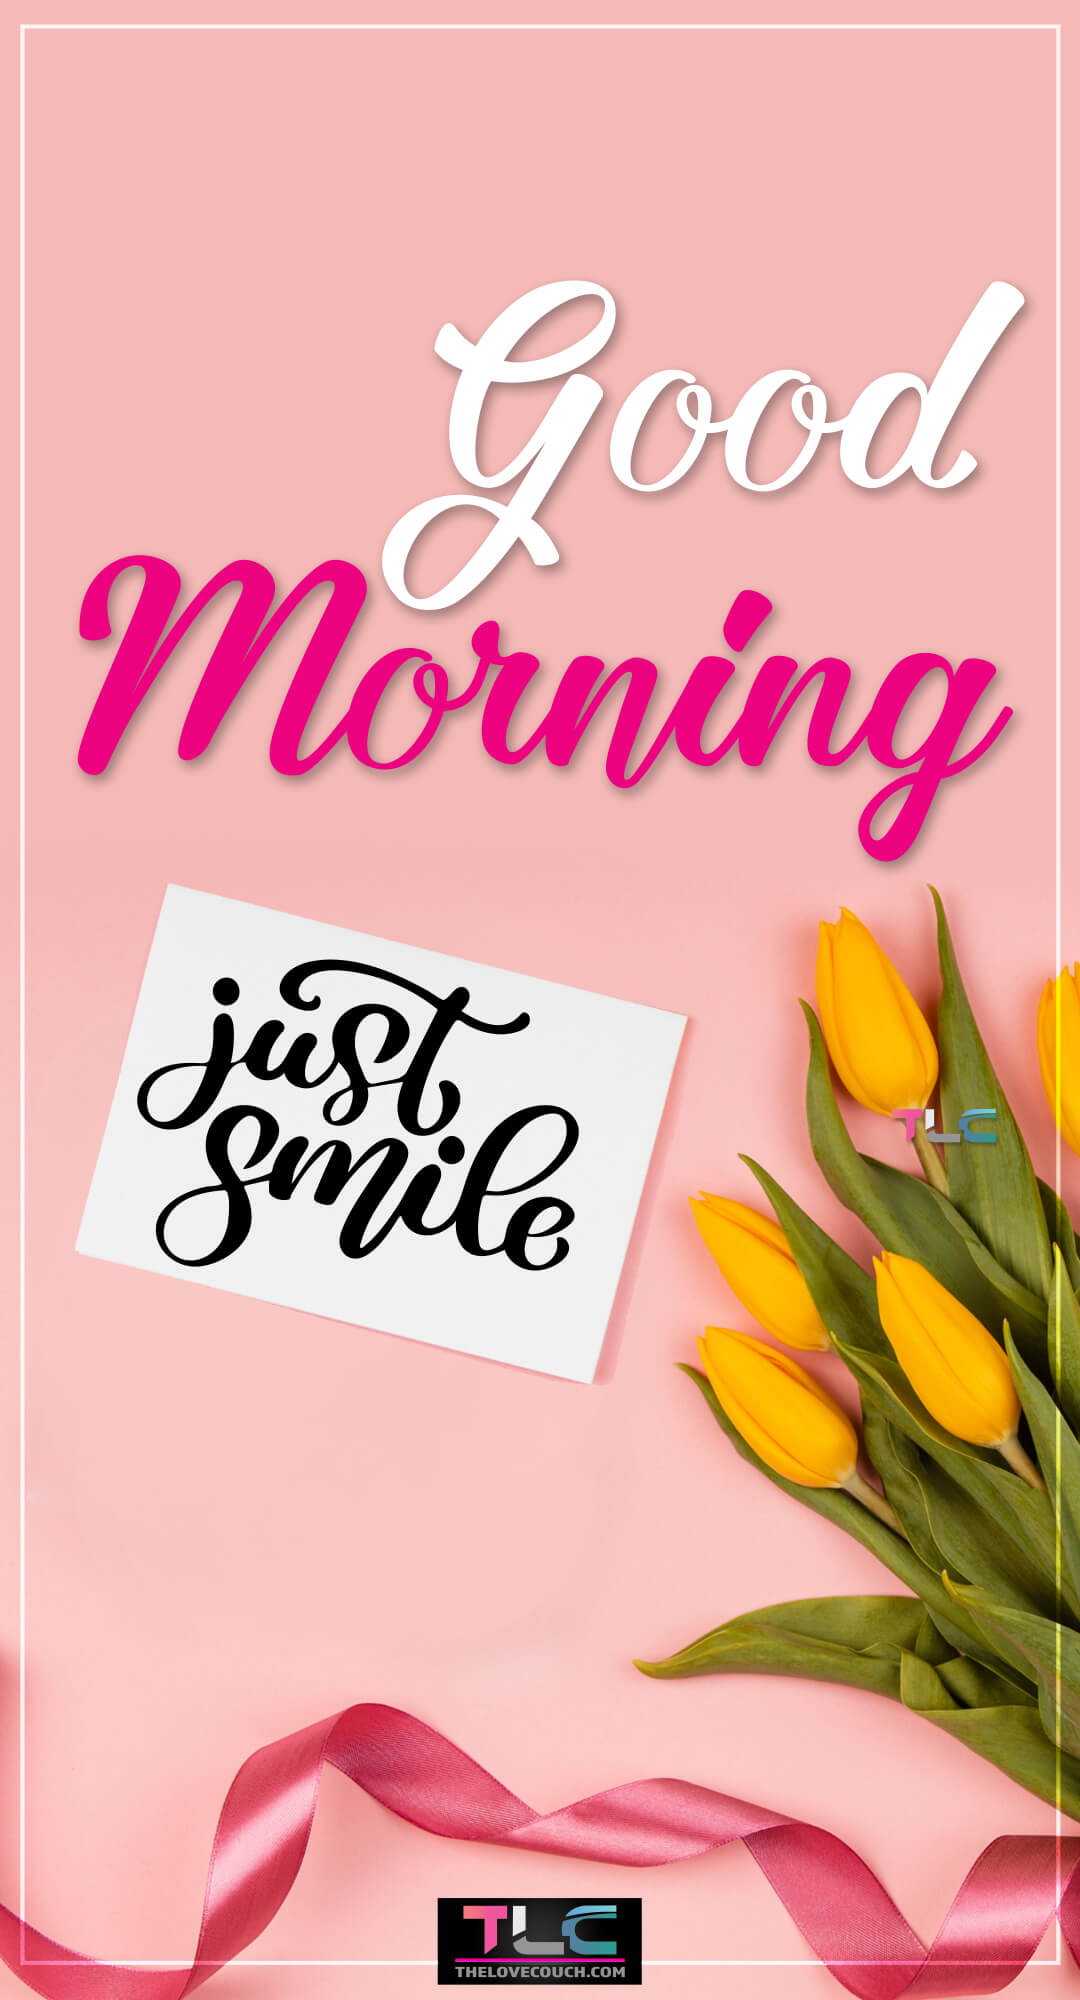 Good Morning Flowers - Yellow tulips beside a Just Smile card on a pink background - Just Smile